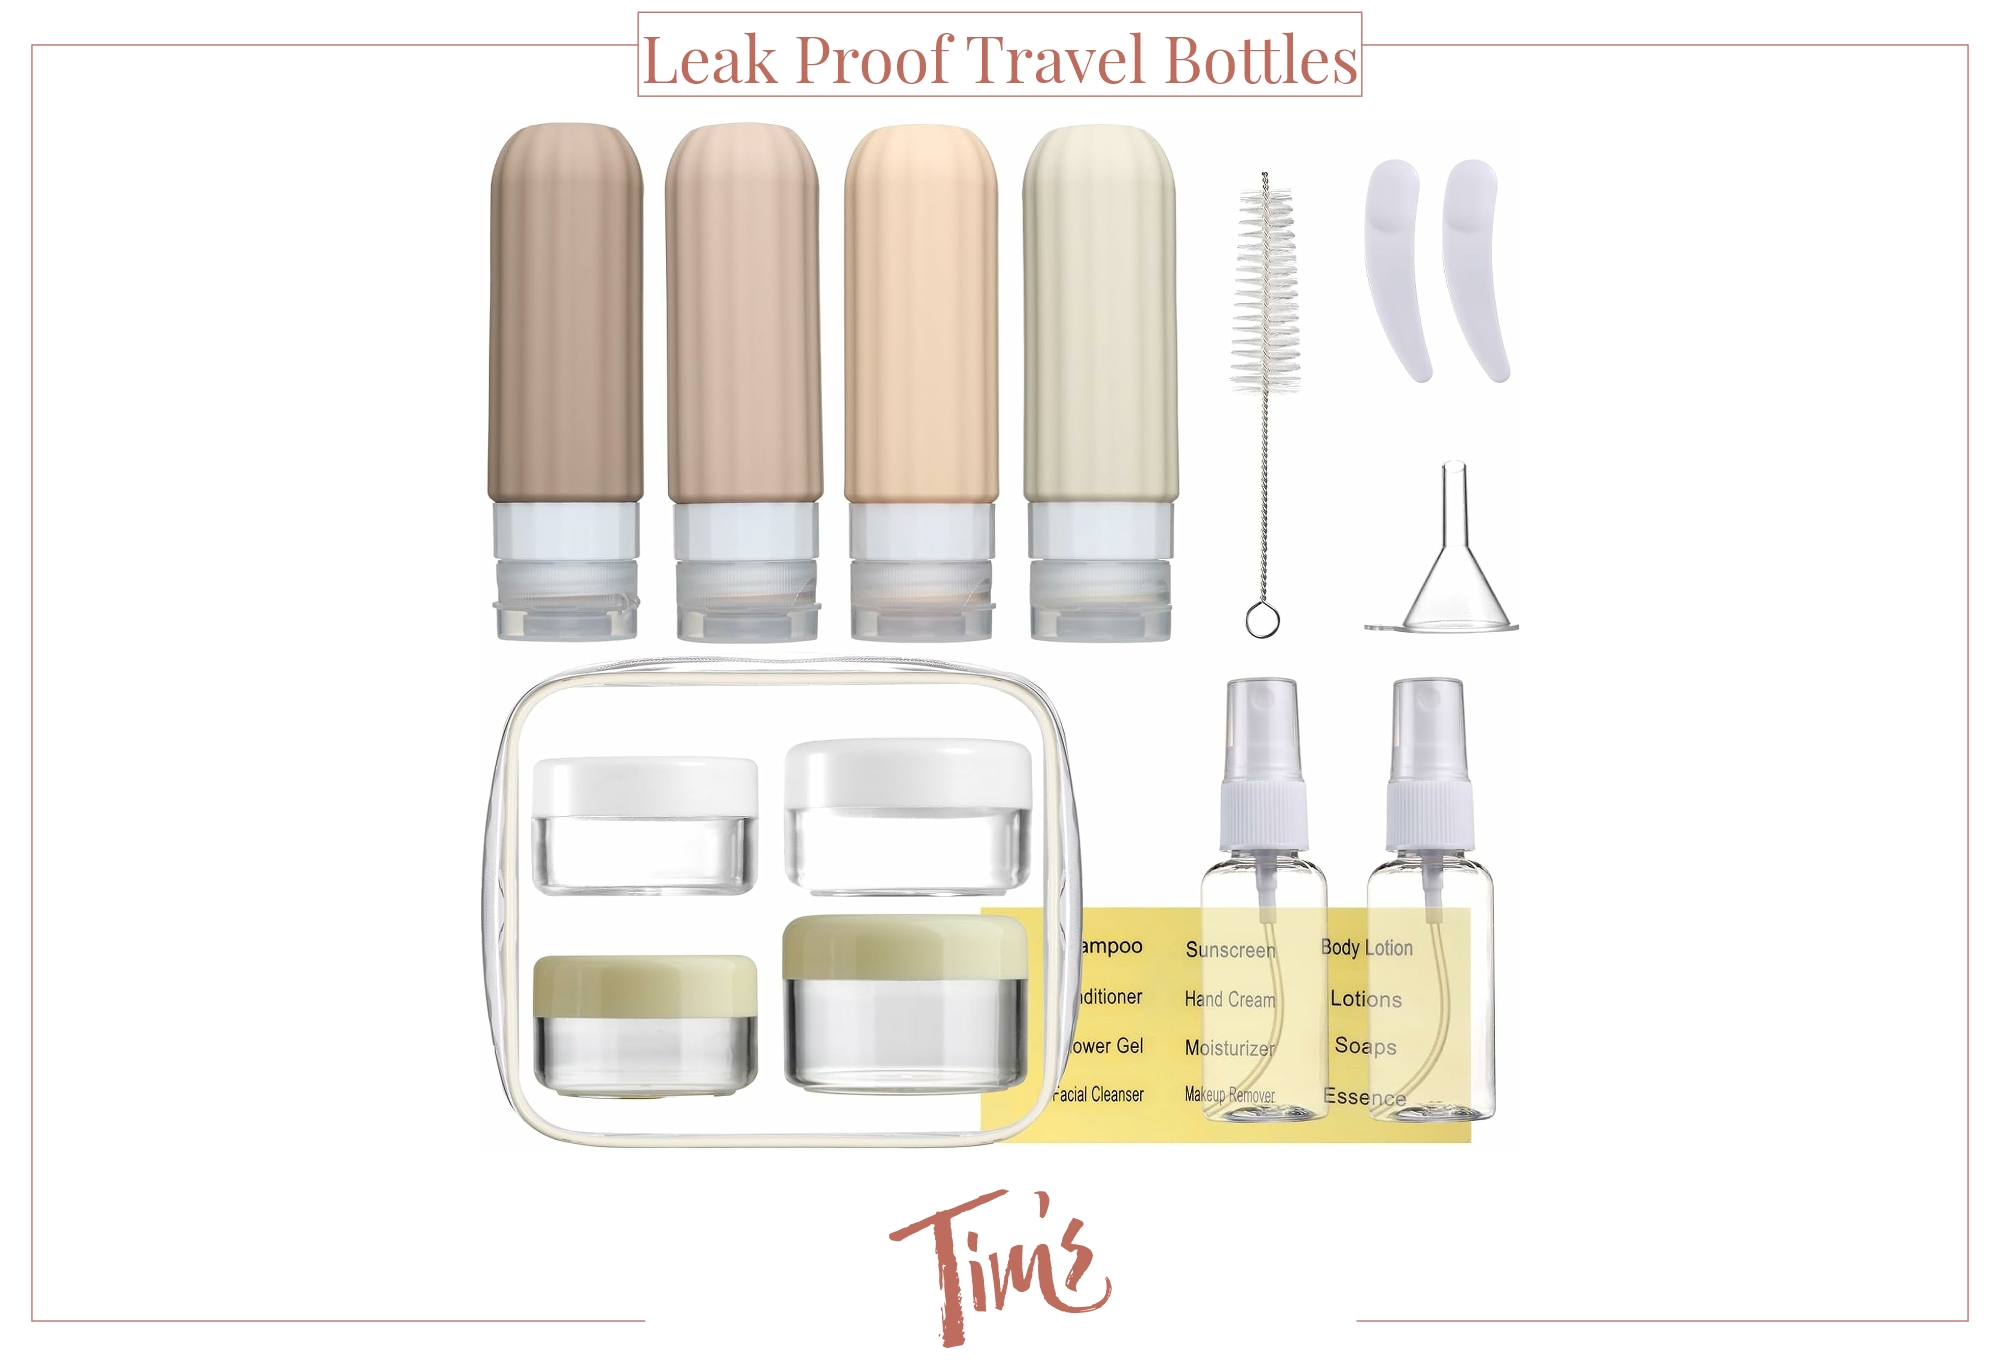 16 Pack Travel Bottles Set for Toiletries, Leakproof Travel Containers for Toiletries TSA Approved Silicone Travel Accessories Squeezable Refillable 3oz for Shampoo Conditioner Lotion